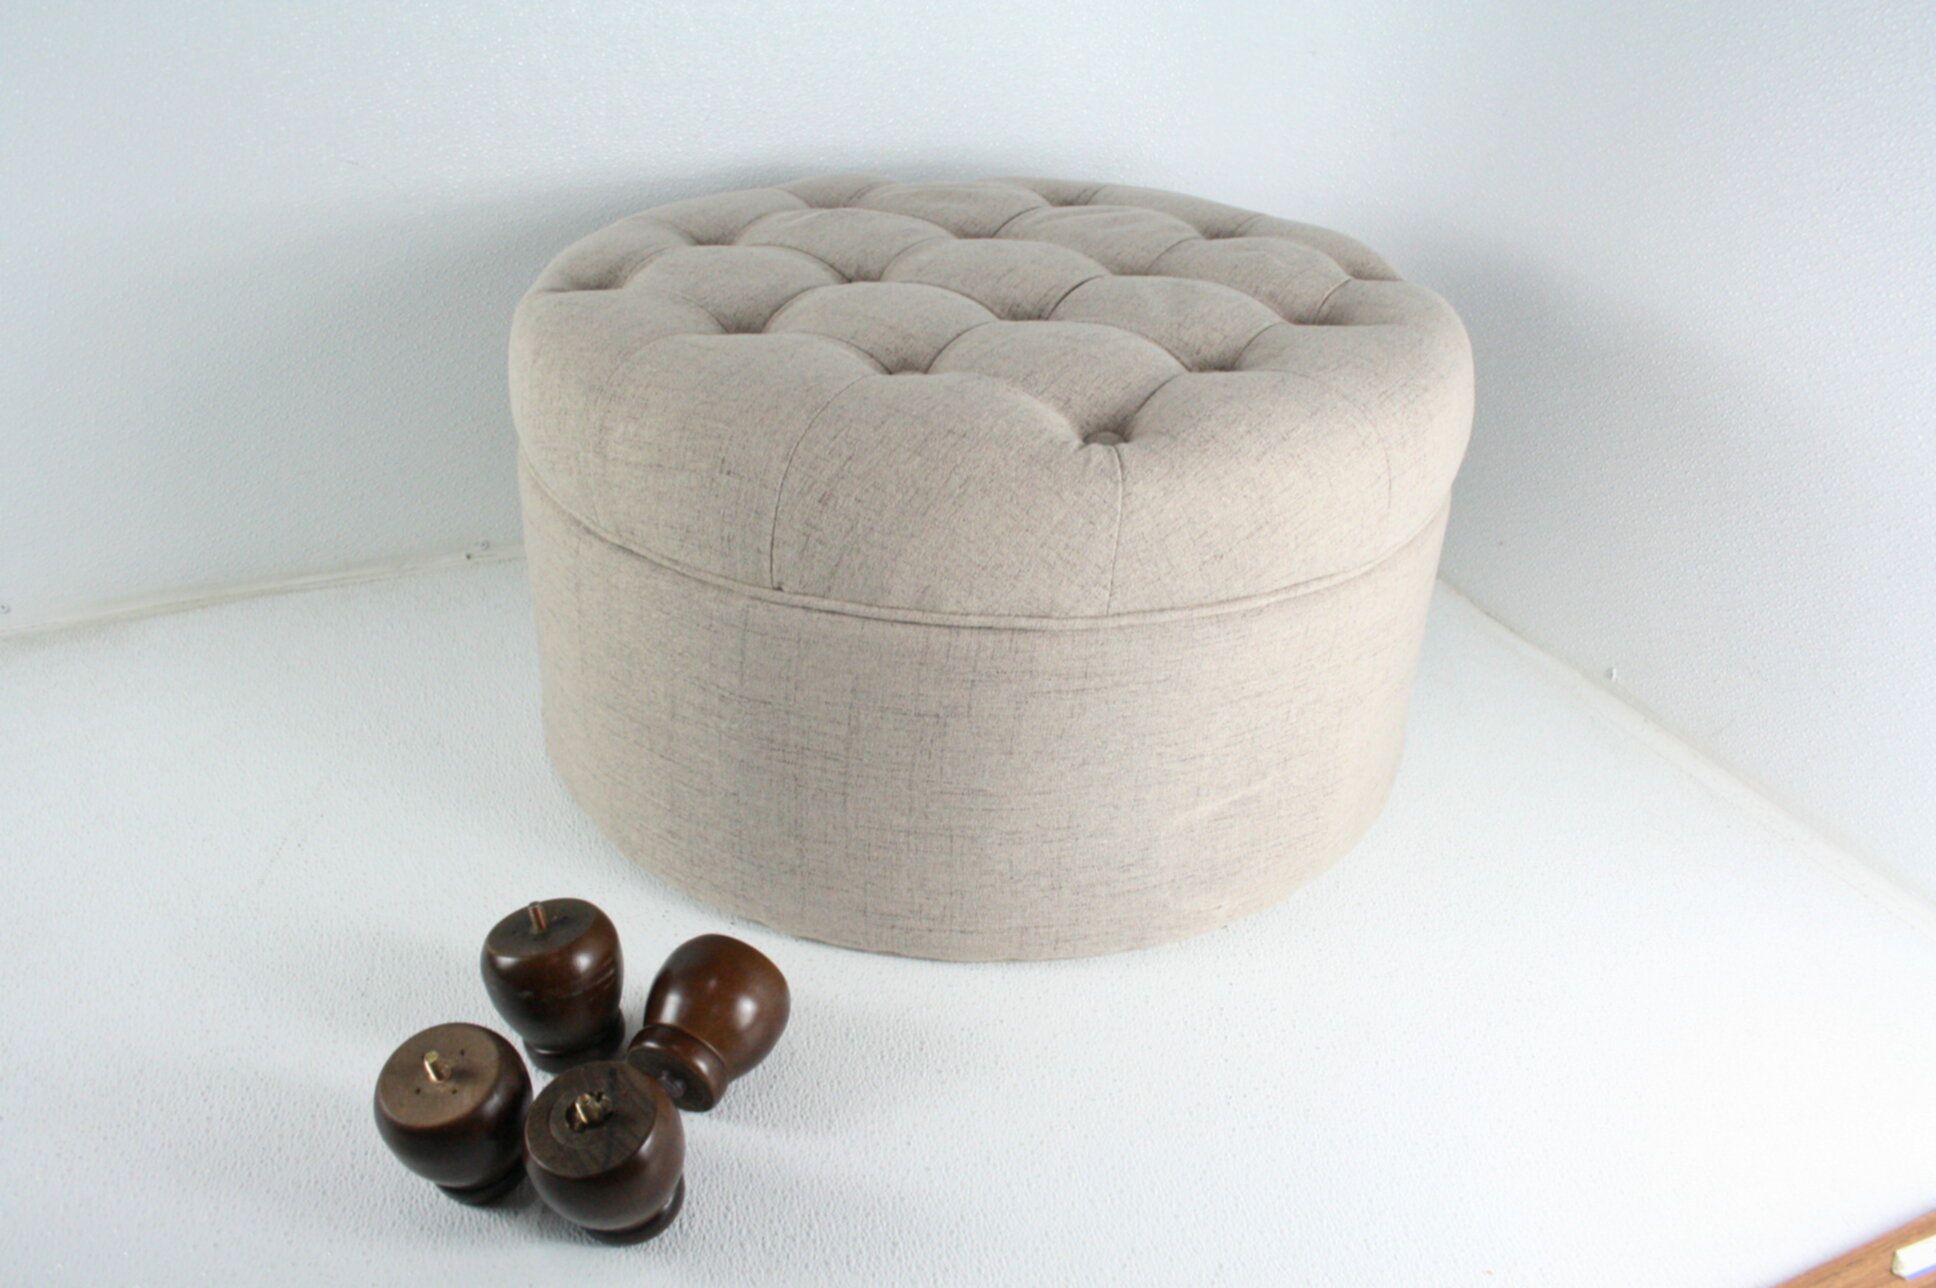 Homepop Large Button Tufted Round Storage Ottoman Light Tan W Wooden With Light Gray Tufted Round Wood Ottomans With Storage (View 9 of 20)